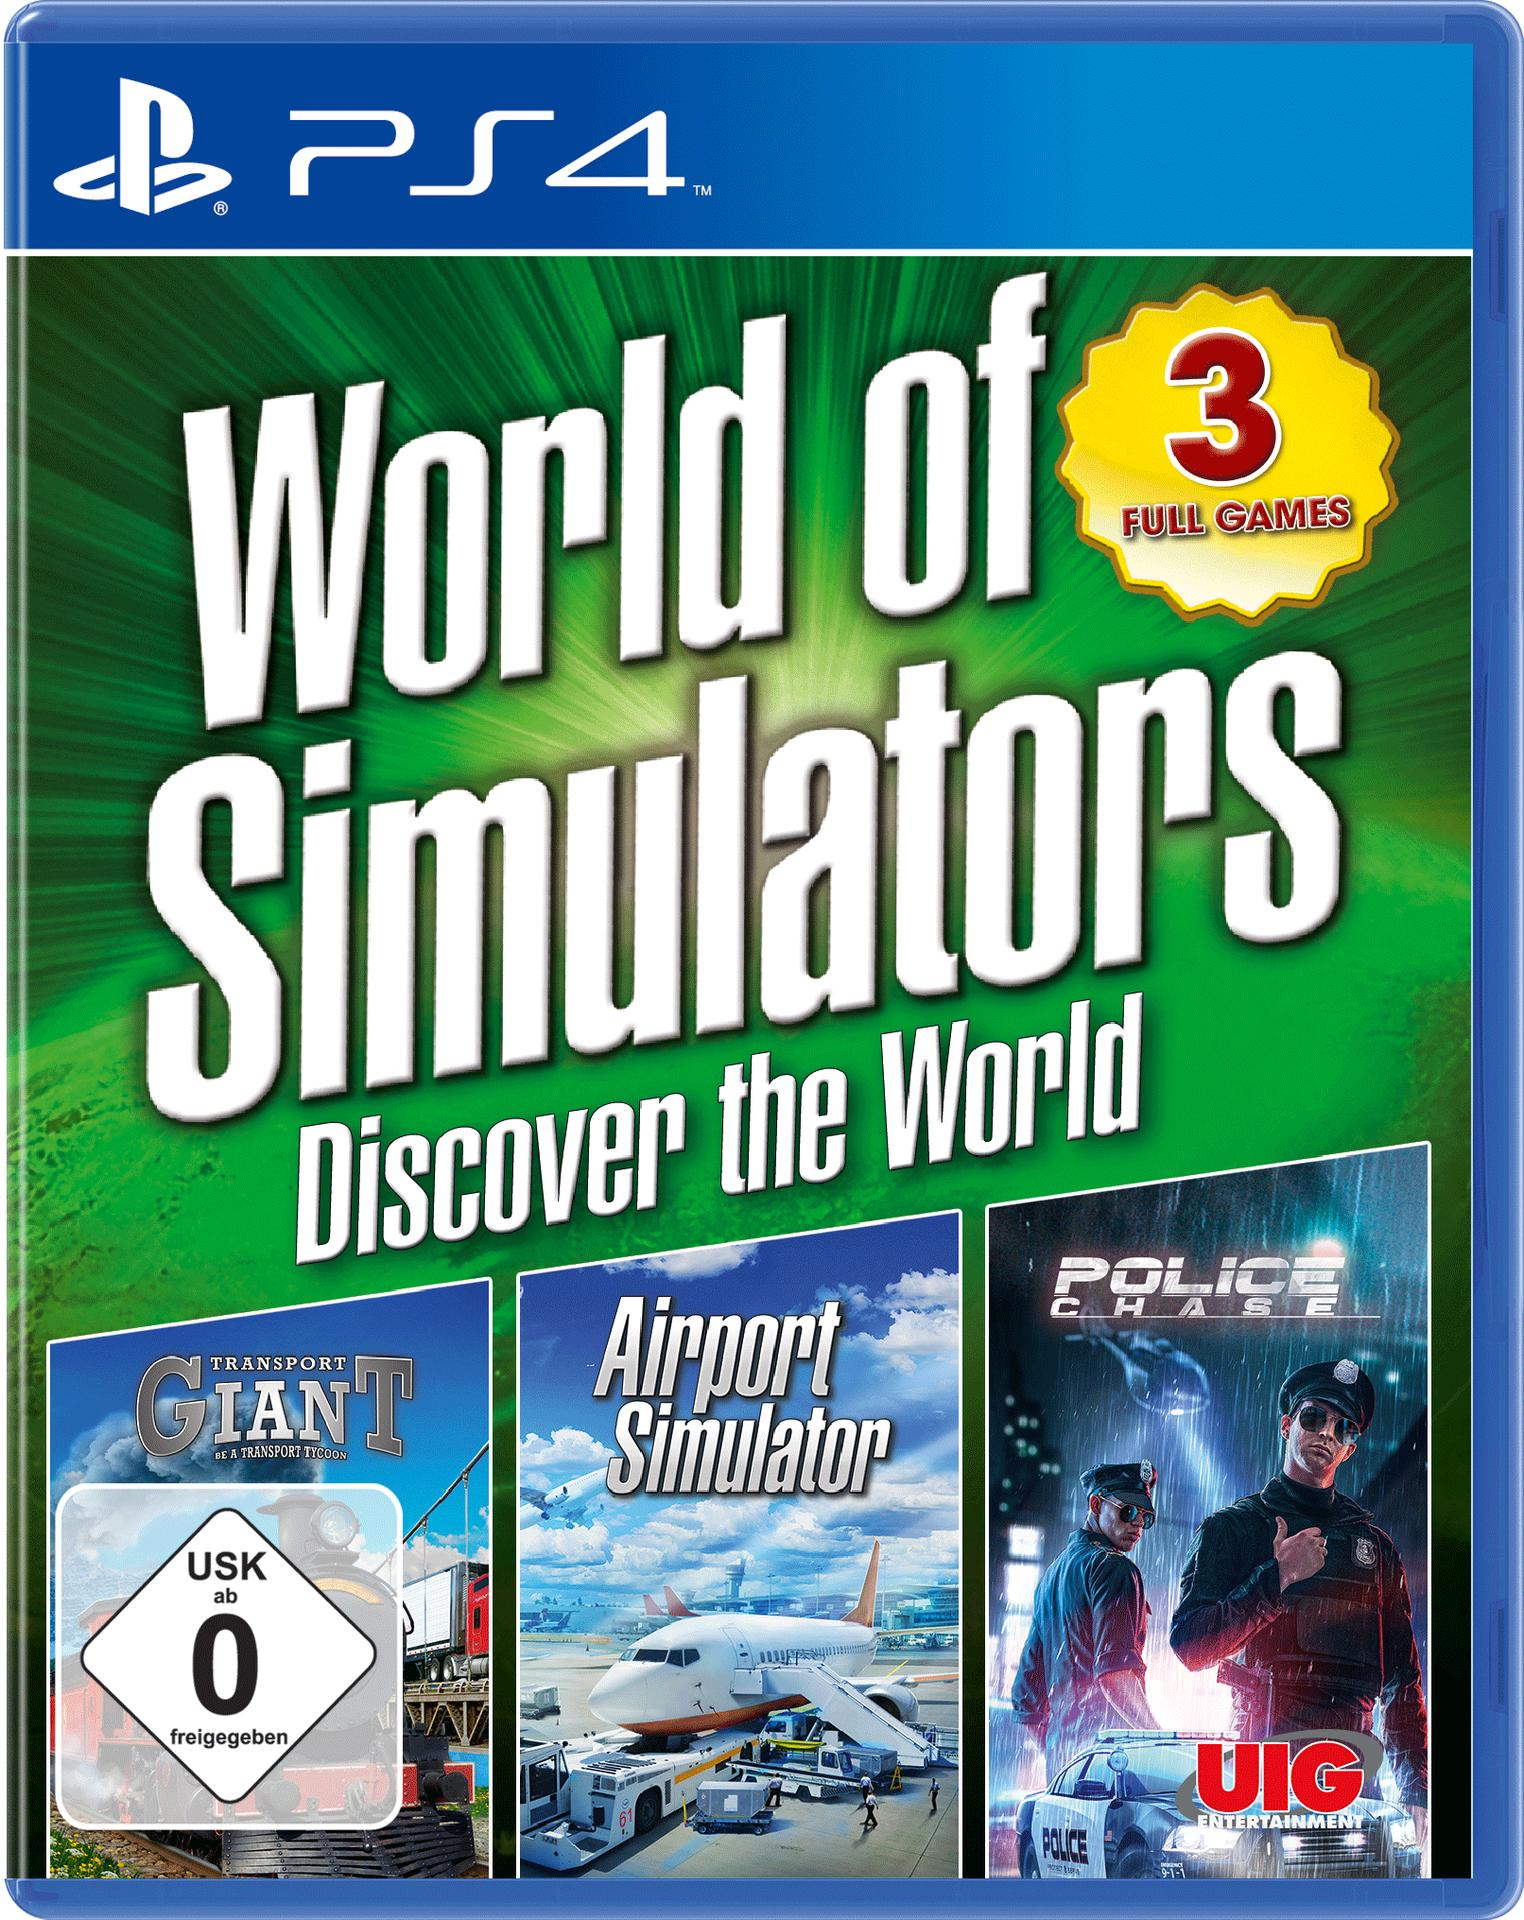 World of Simulators: Discover 4] - the [PlayStation World